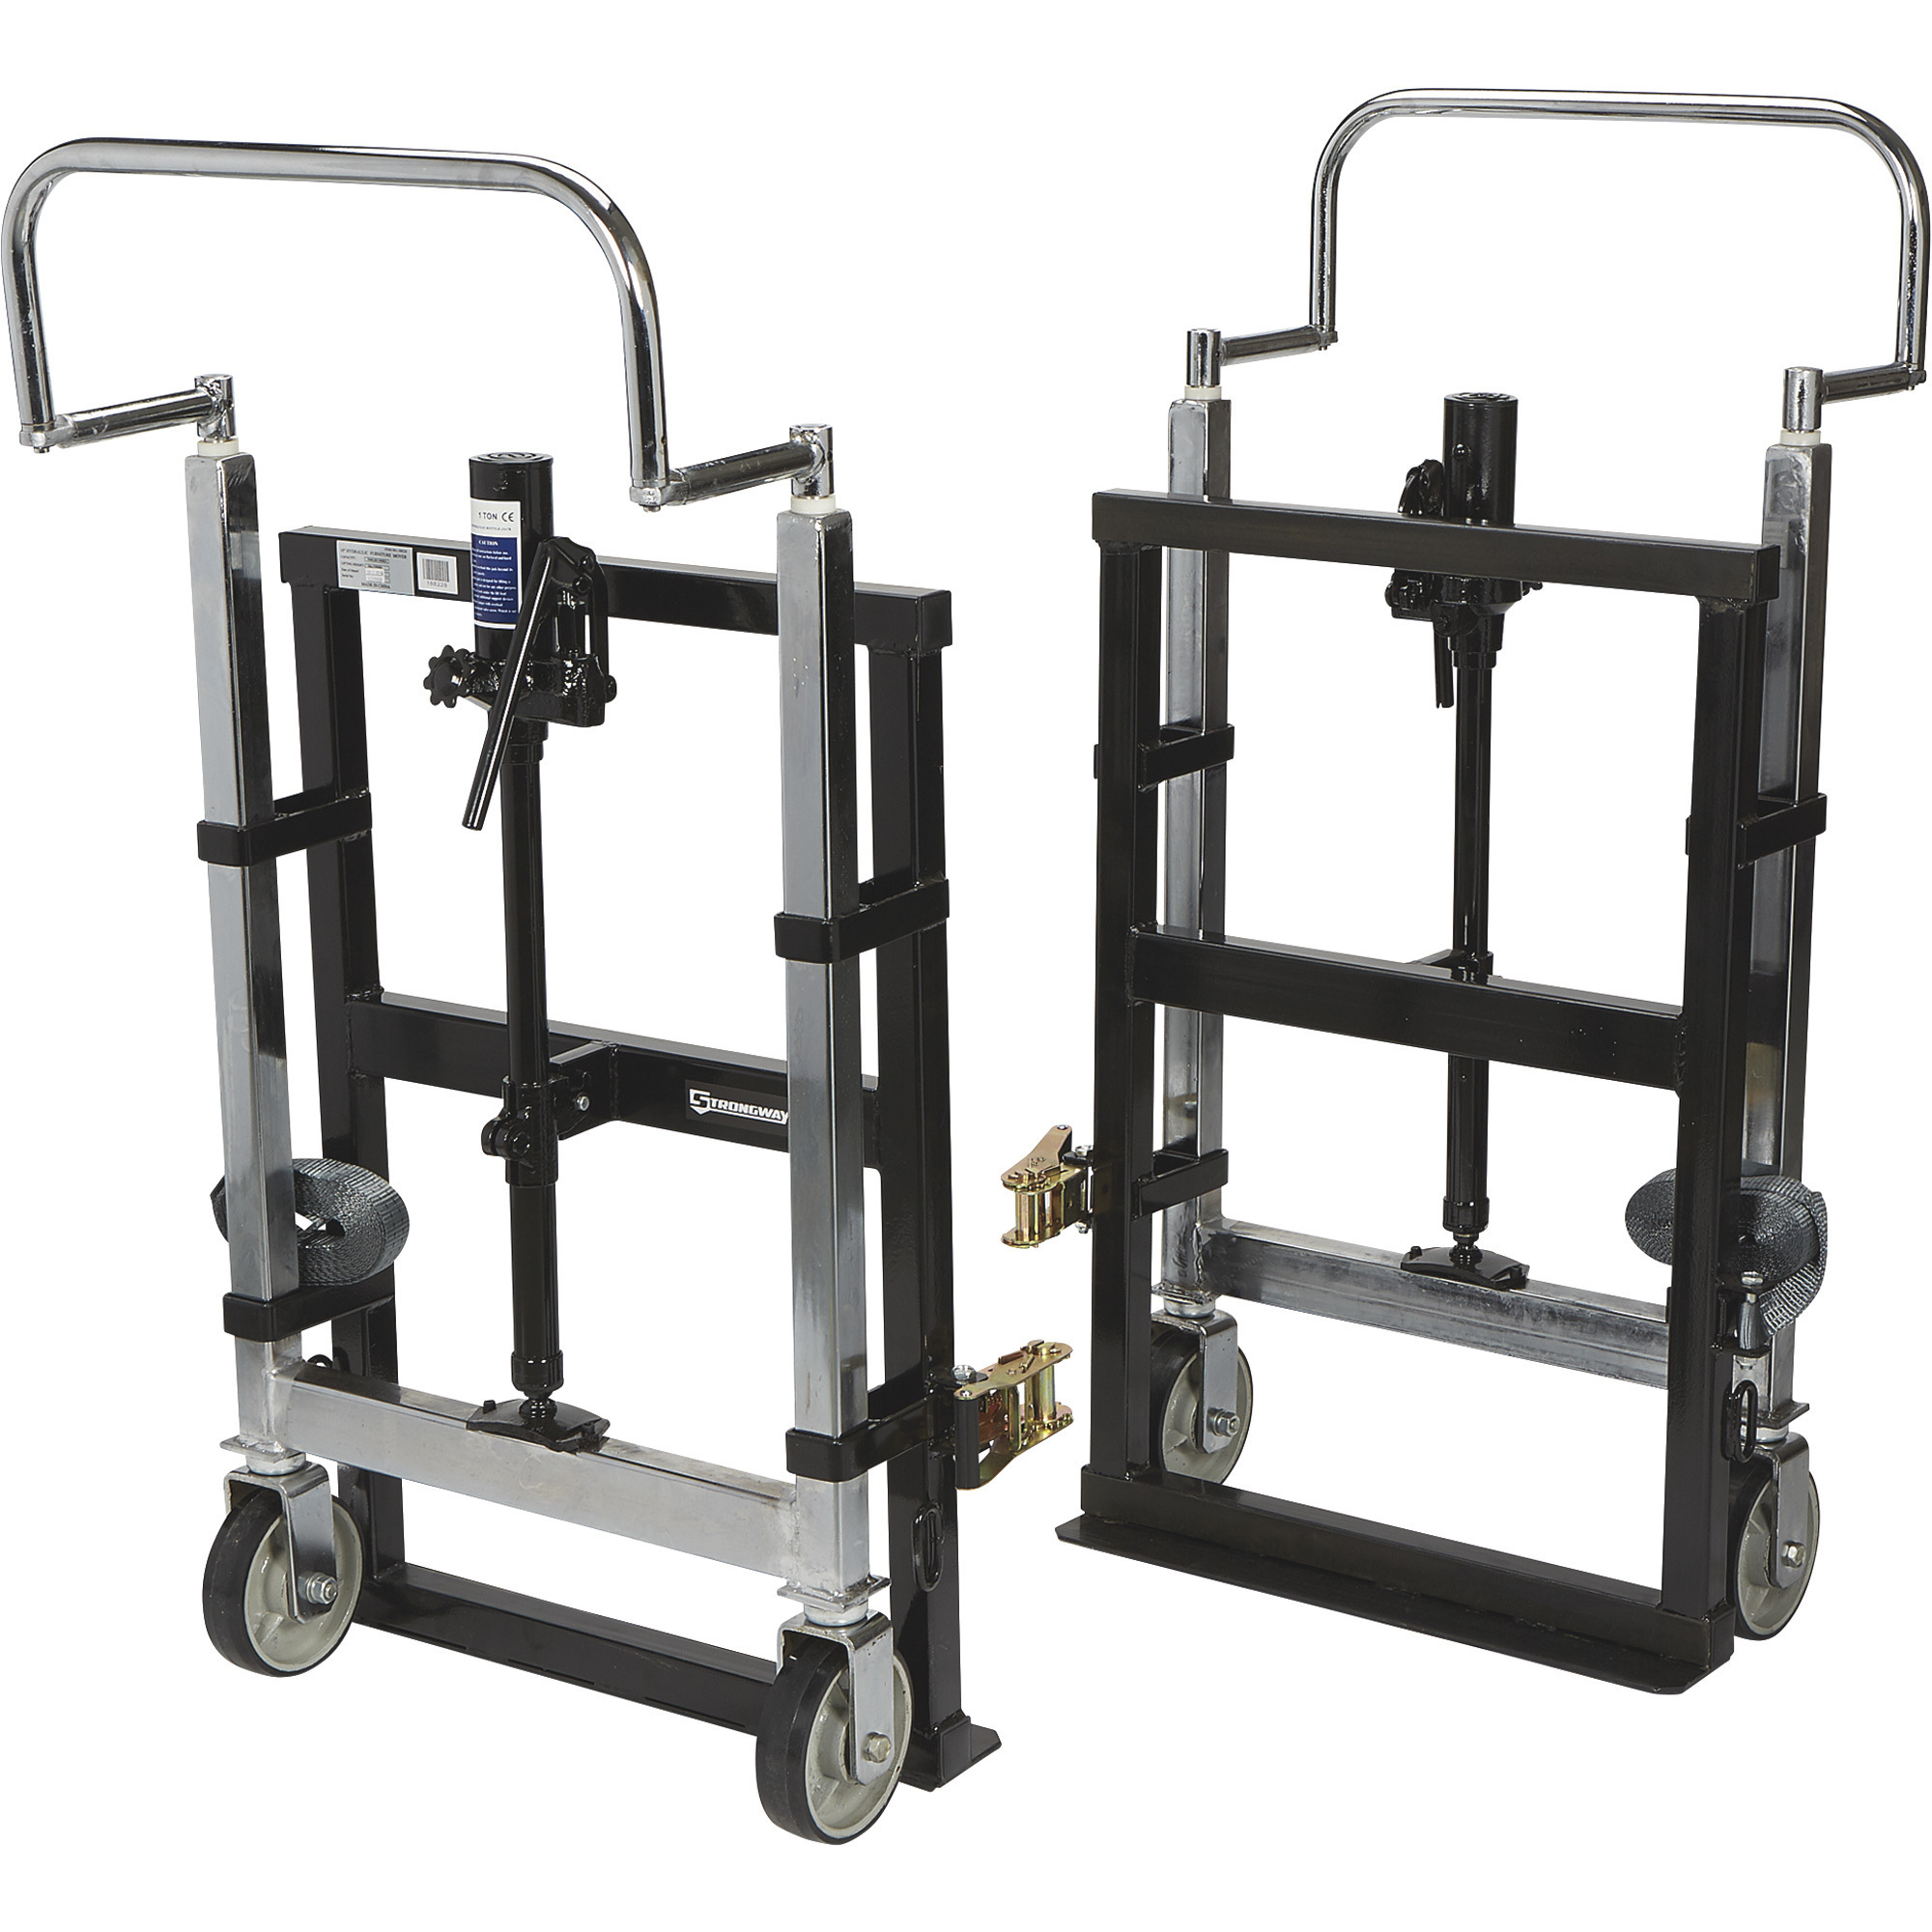 Manual Furniture Mover (Set of 2), 1100 lb. Cap, Aluminum, 12 Lift Height, Machinery Mover